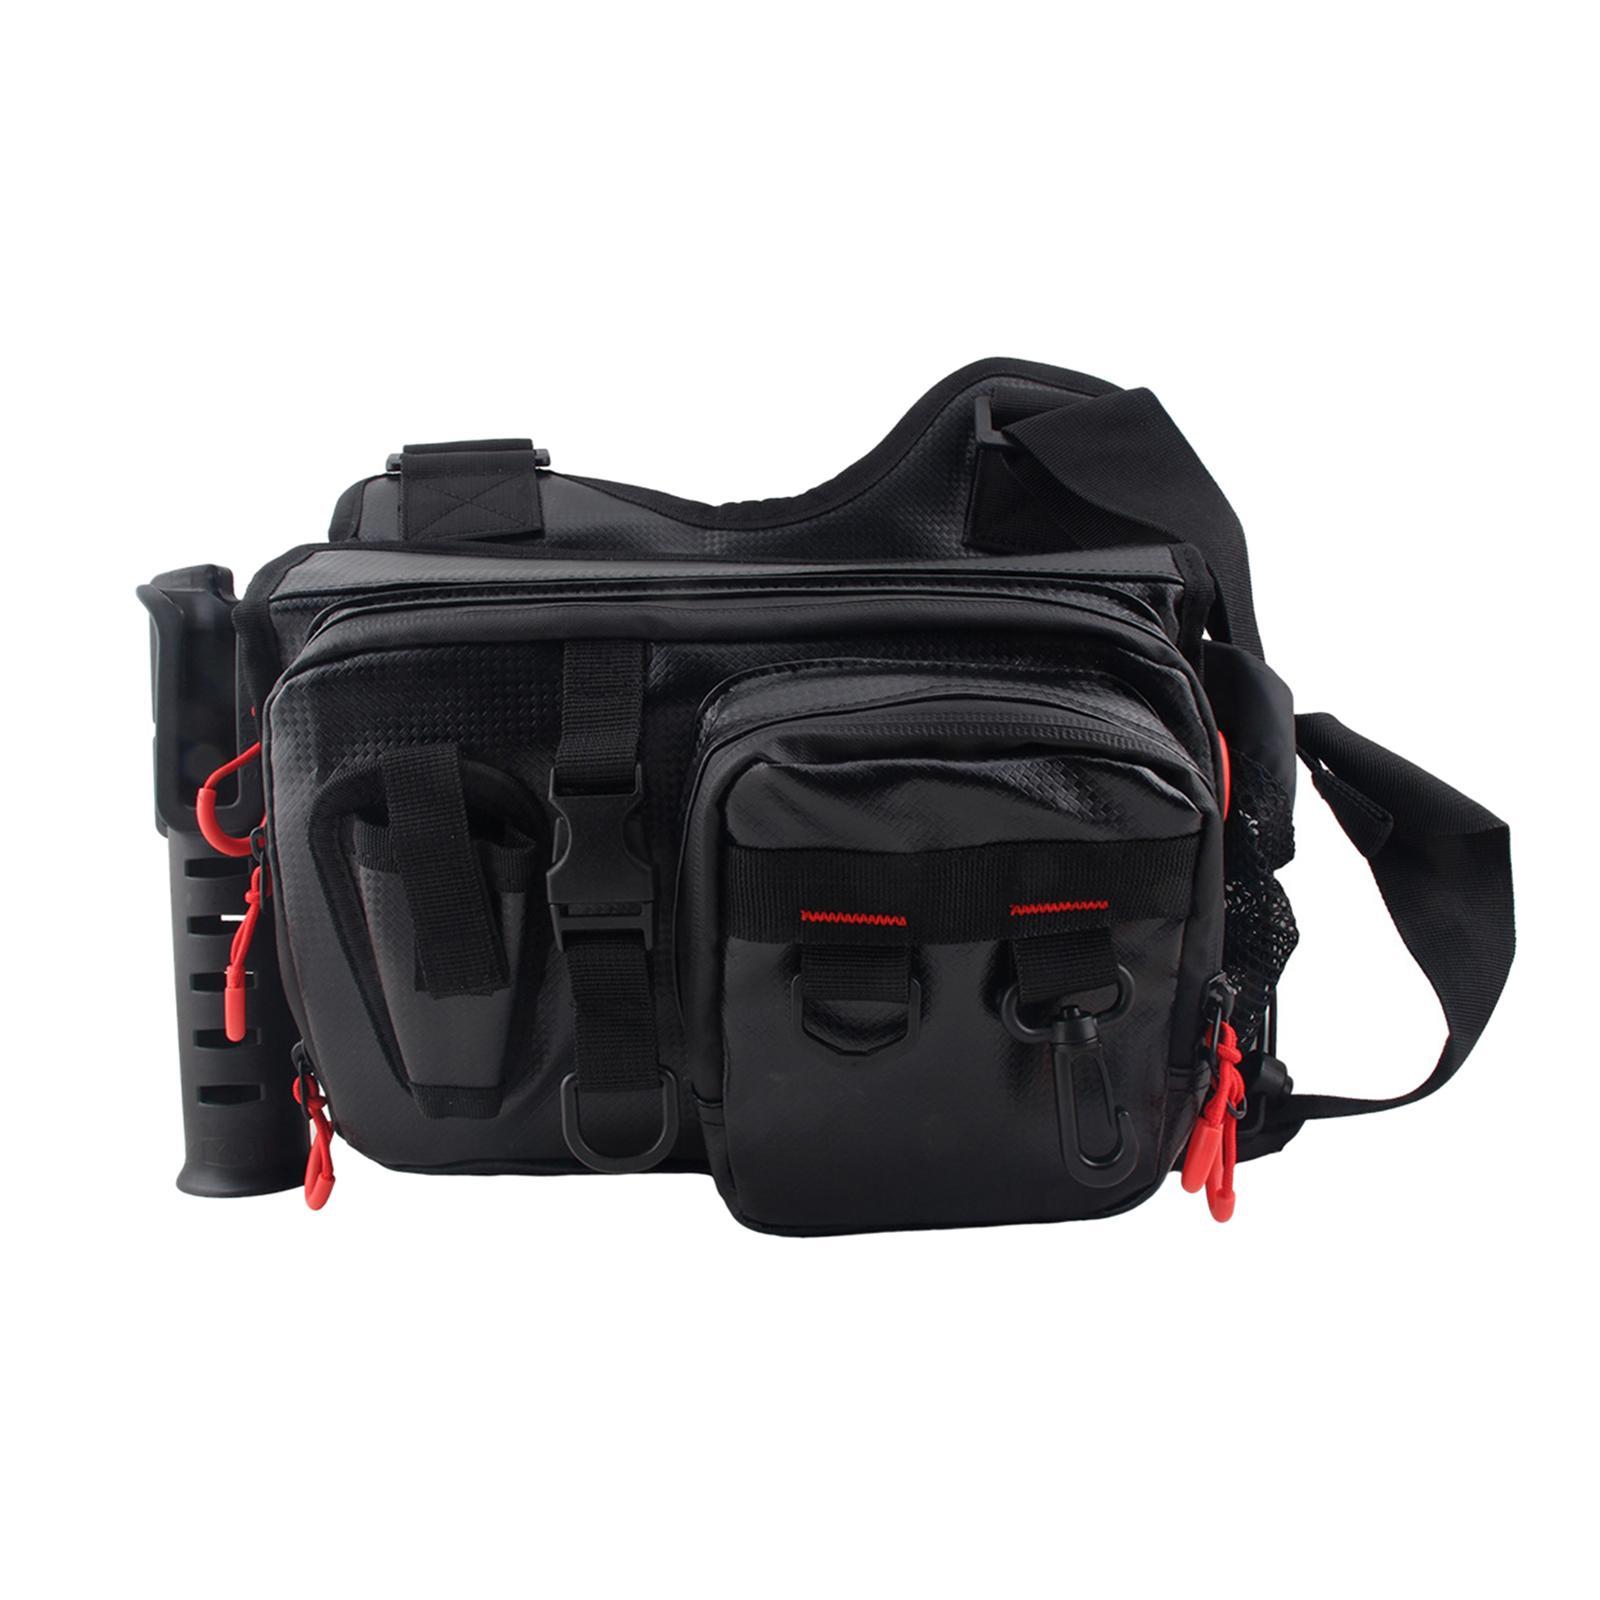 Lure Bag Large Capacity Durable Lure Fishing Bag for Fishing Hiking Outdoor